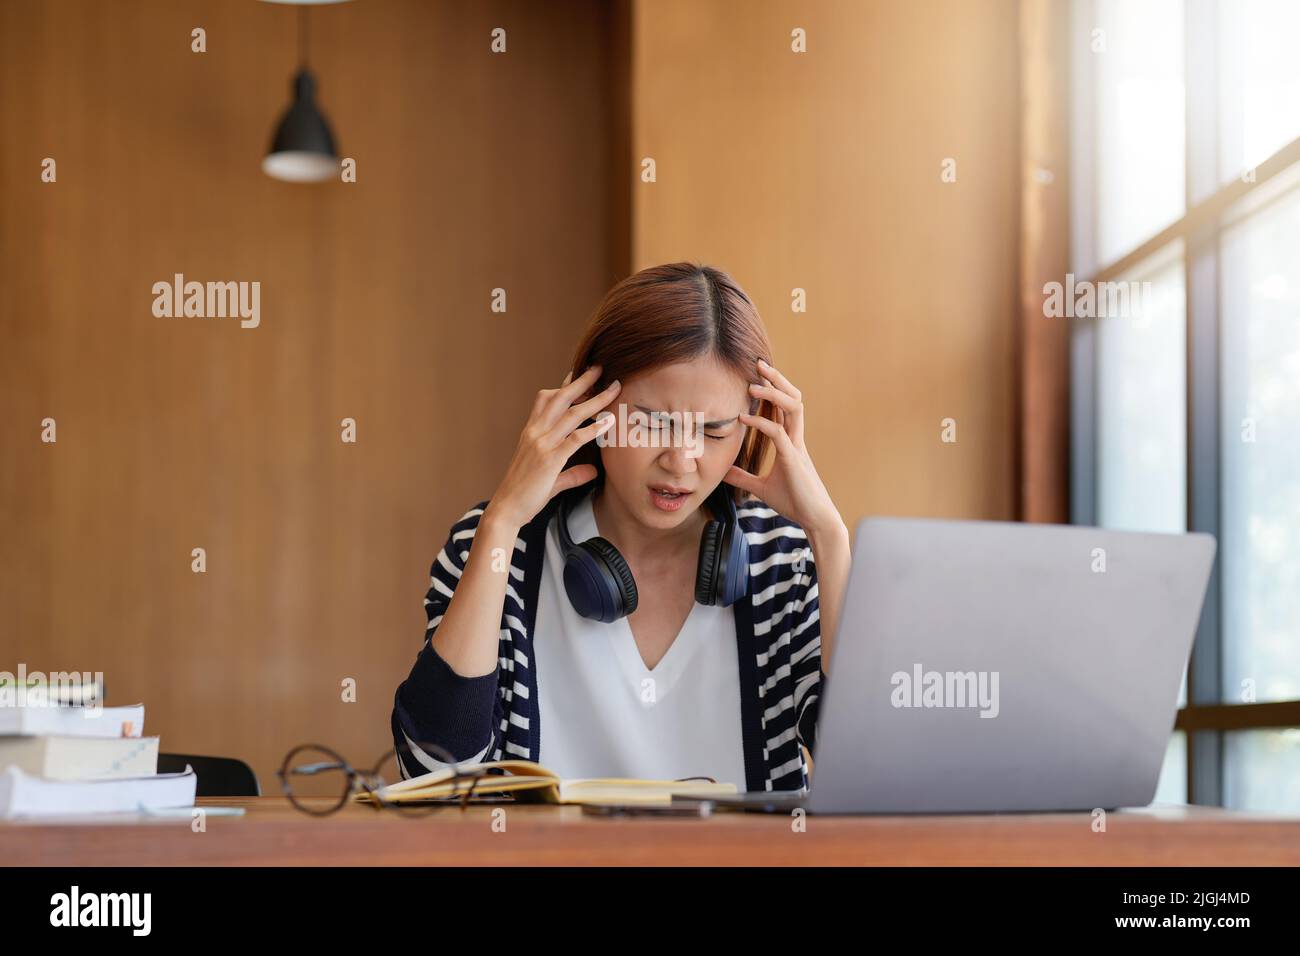 Stressed Asian woman cover her face with hand and feel upset from work in front of laptop computer on desk at office,Stress office lifestyle concept. Stock Photo